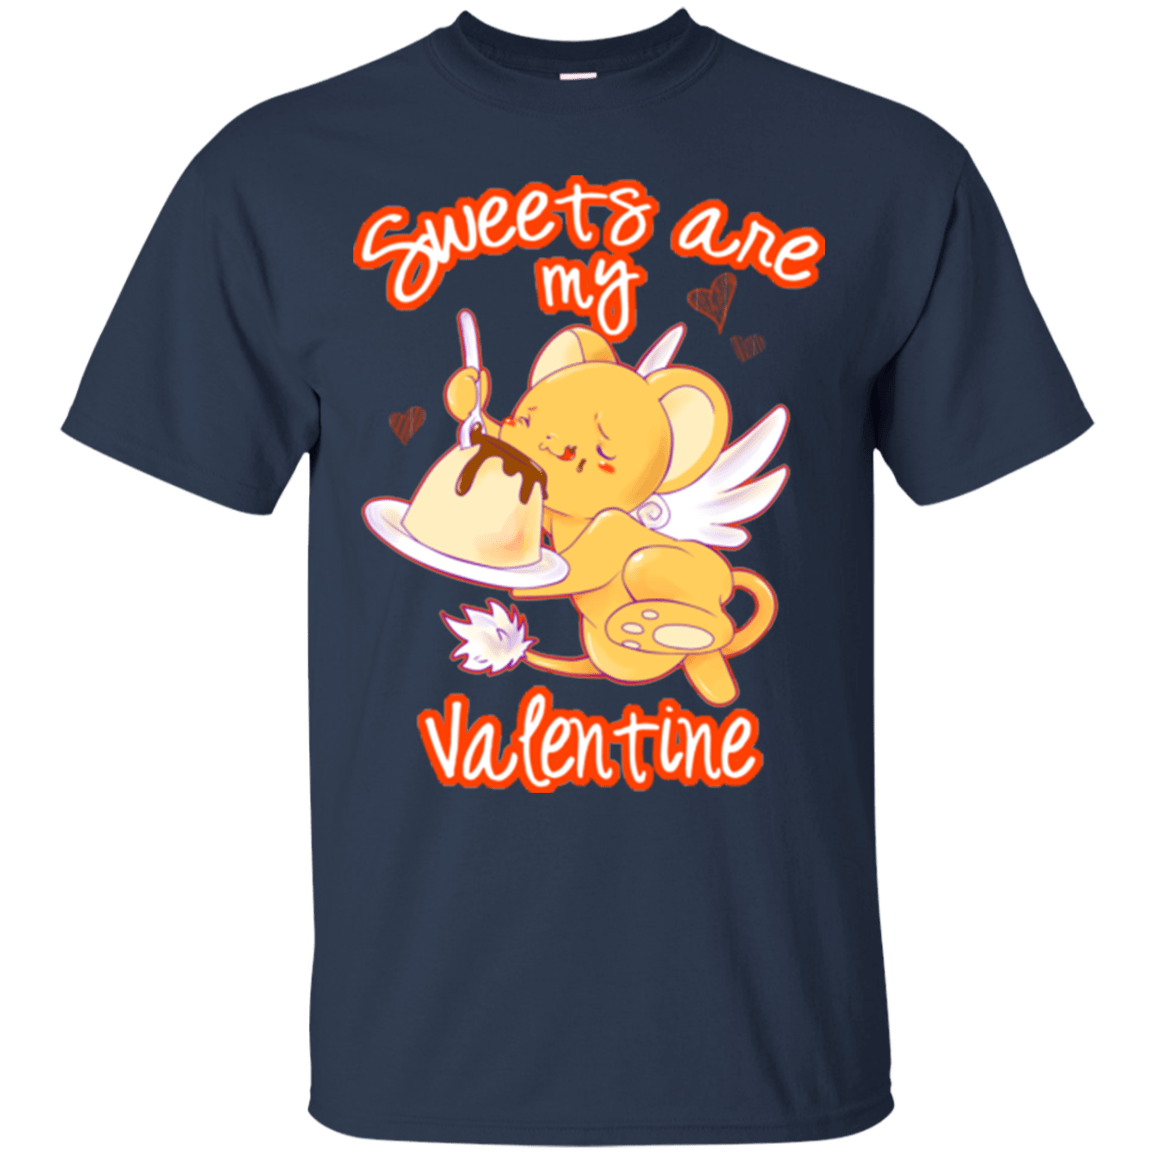 T-Shirts Navy / Small Sweets are my Valentine T-Shirt